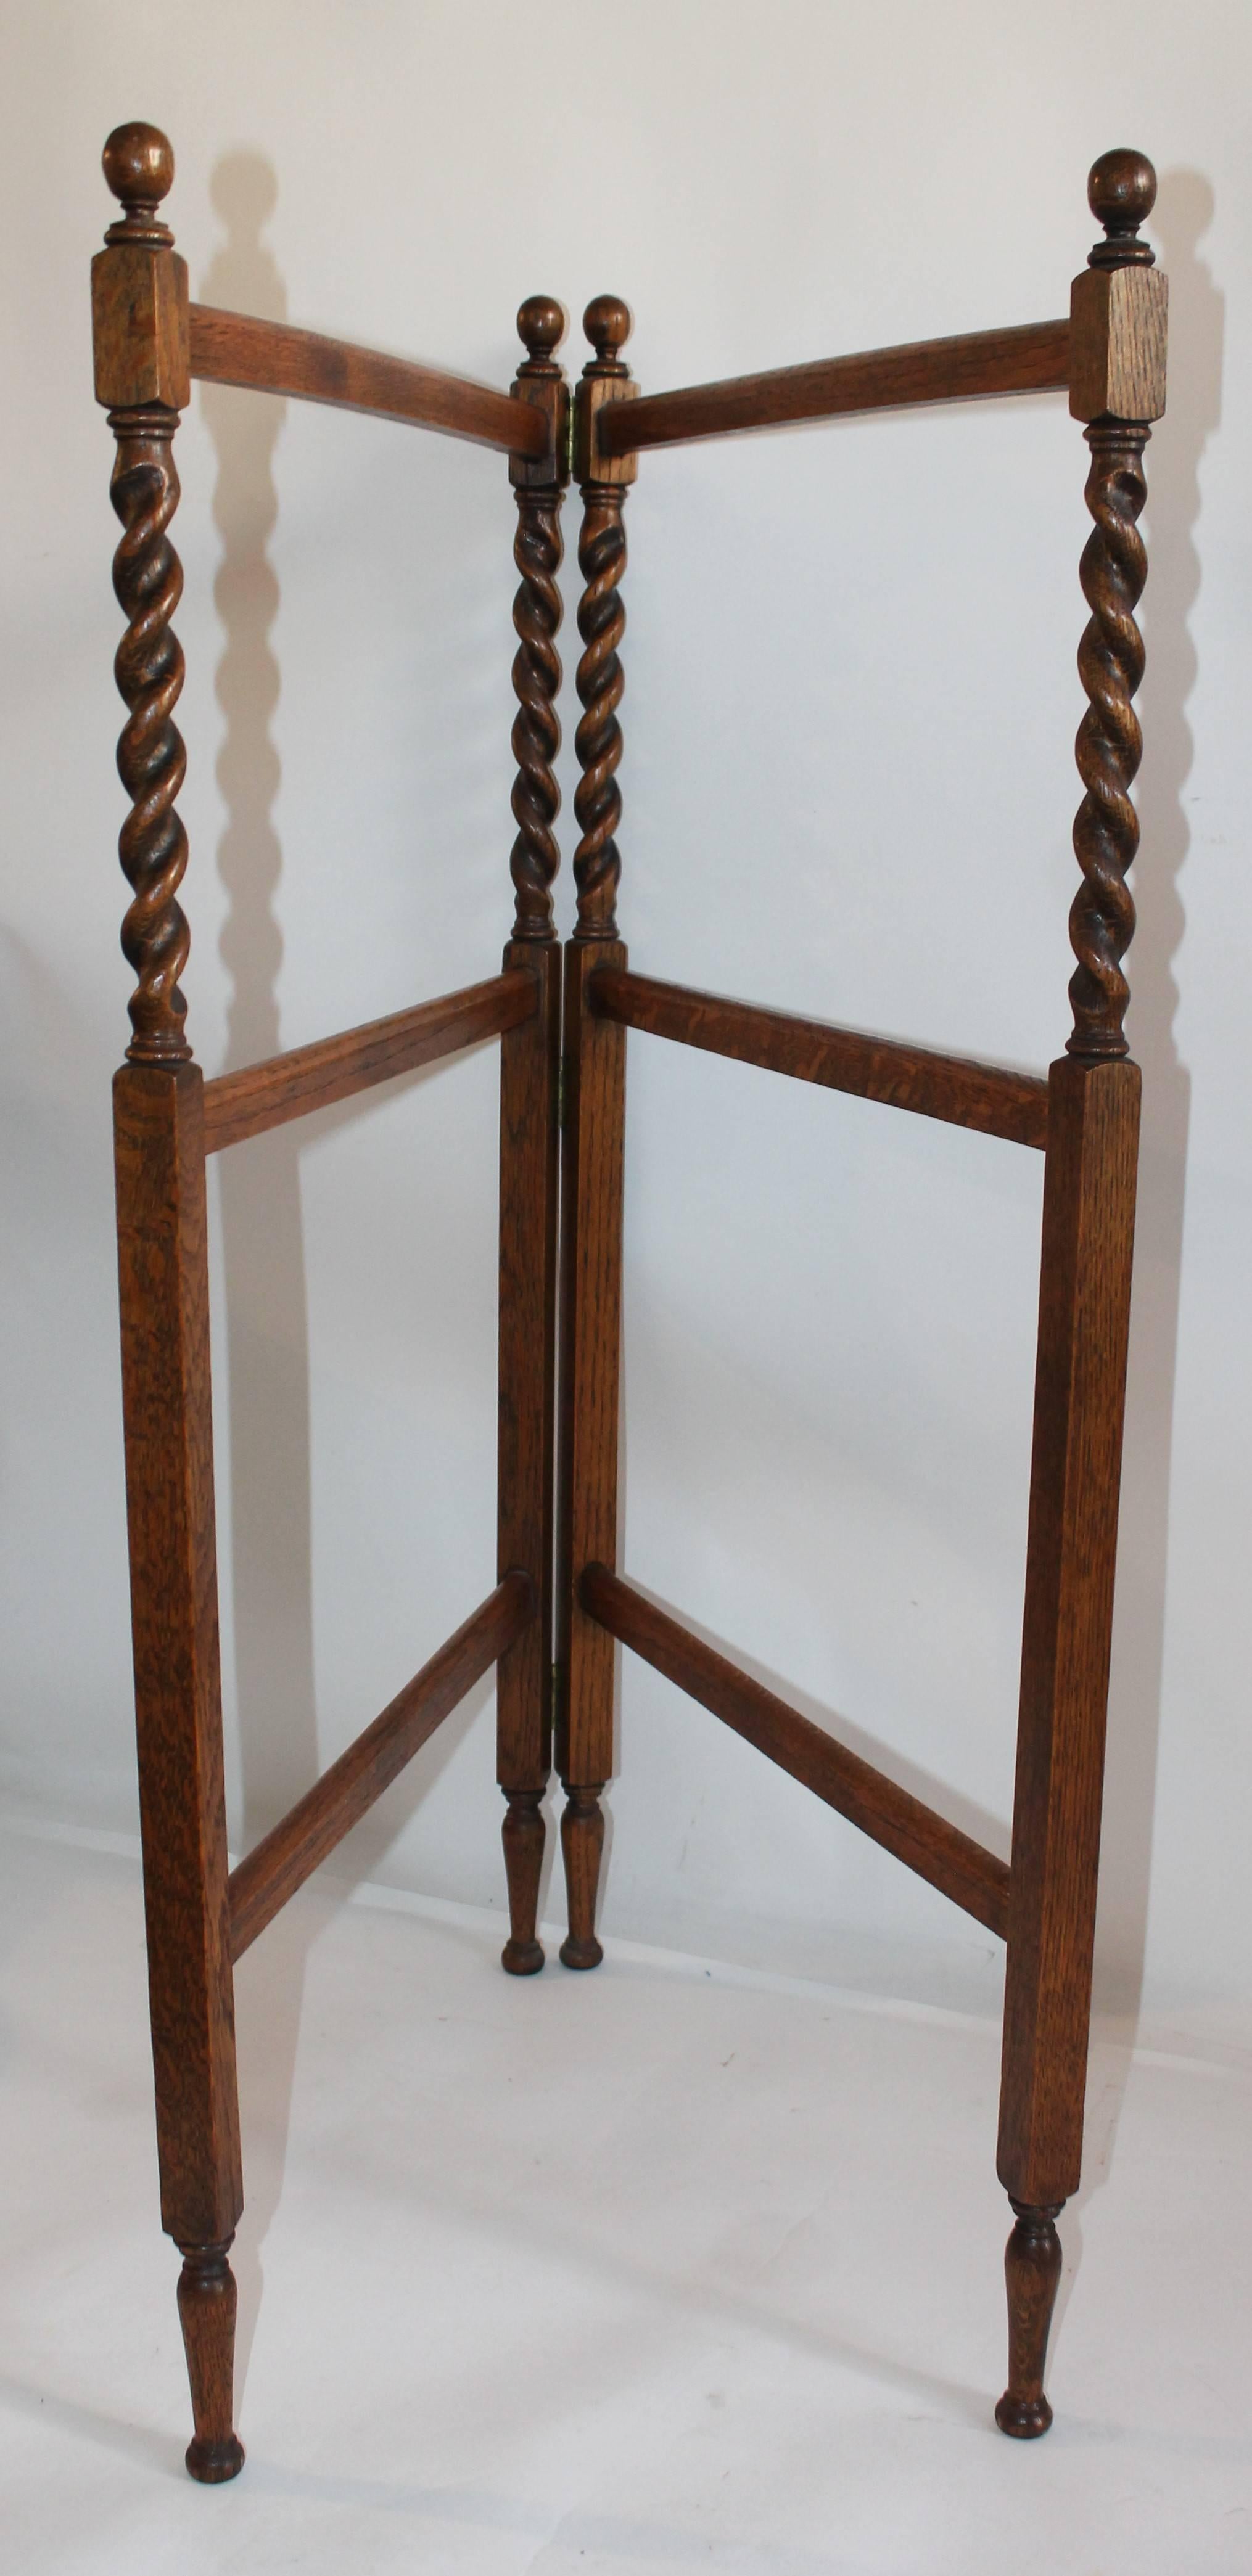 19Thc Oak barley twists folding quilt rack. The condition is very good and sturdy.